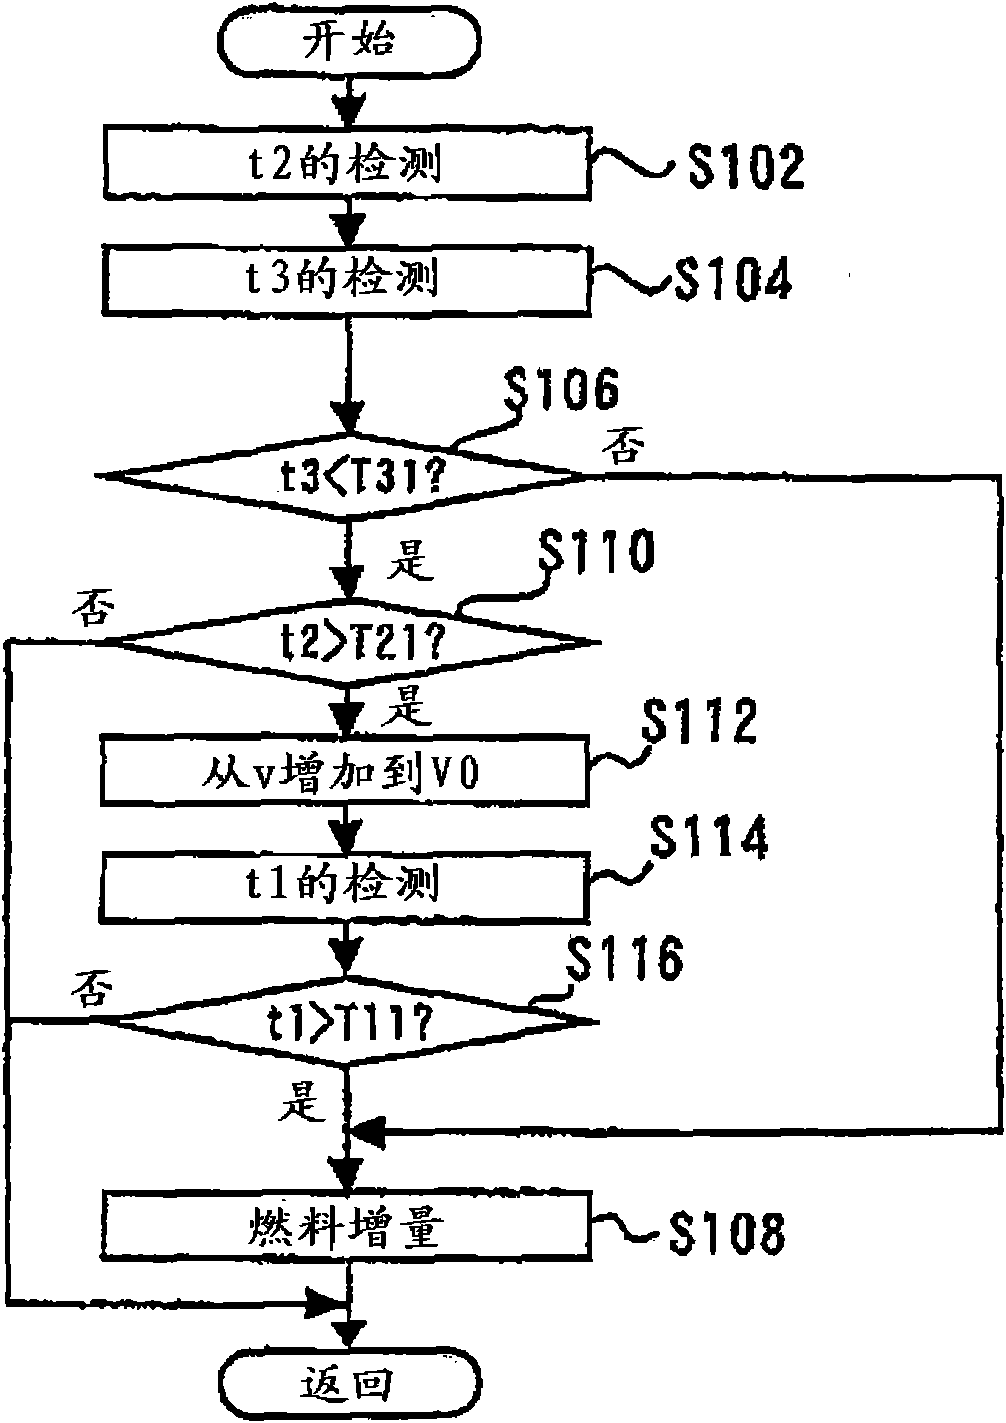 Control device for an internal combustion engine